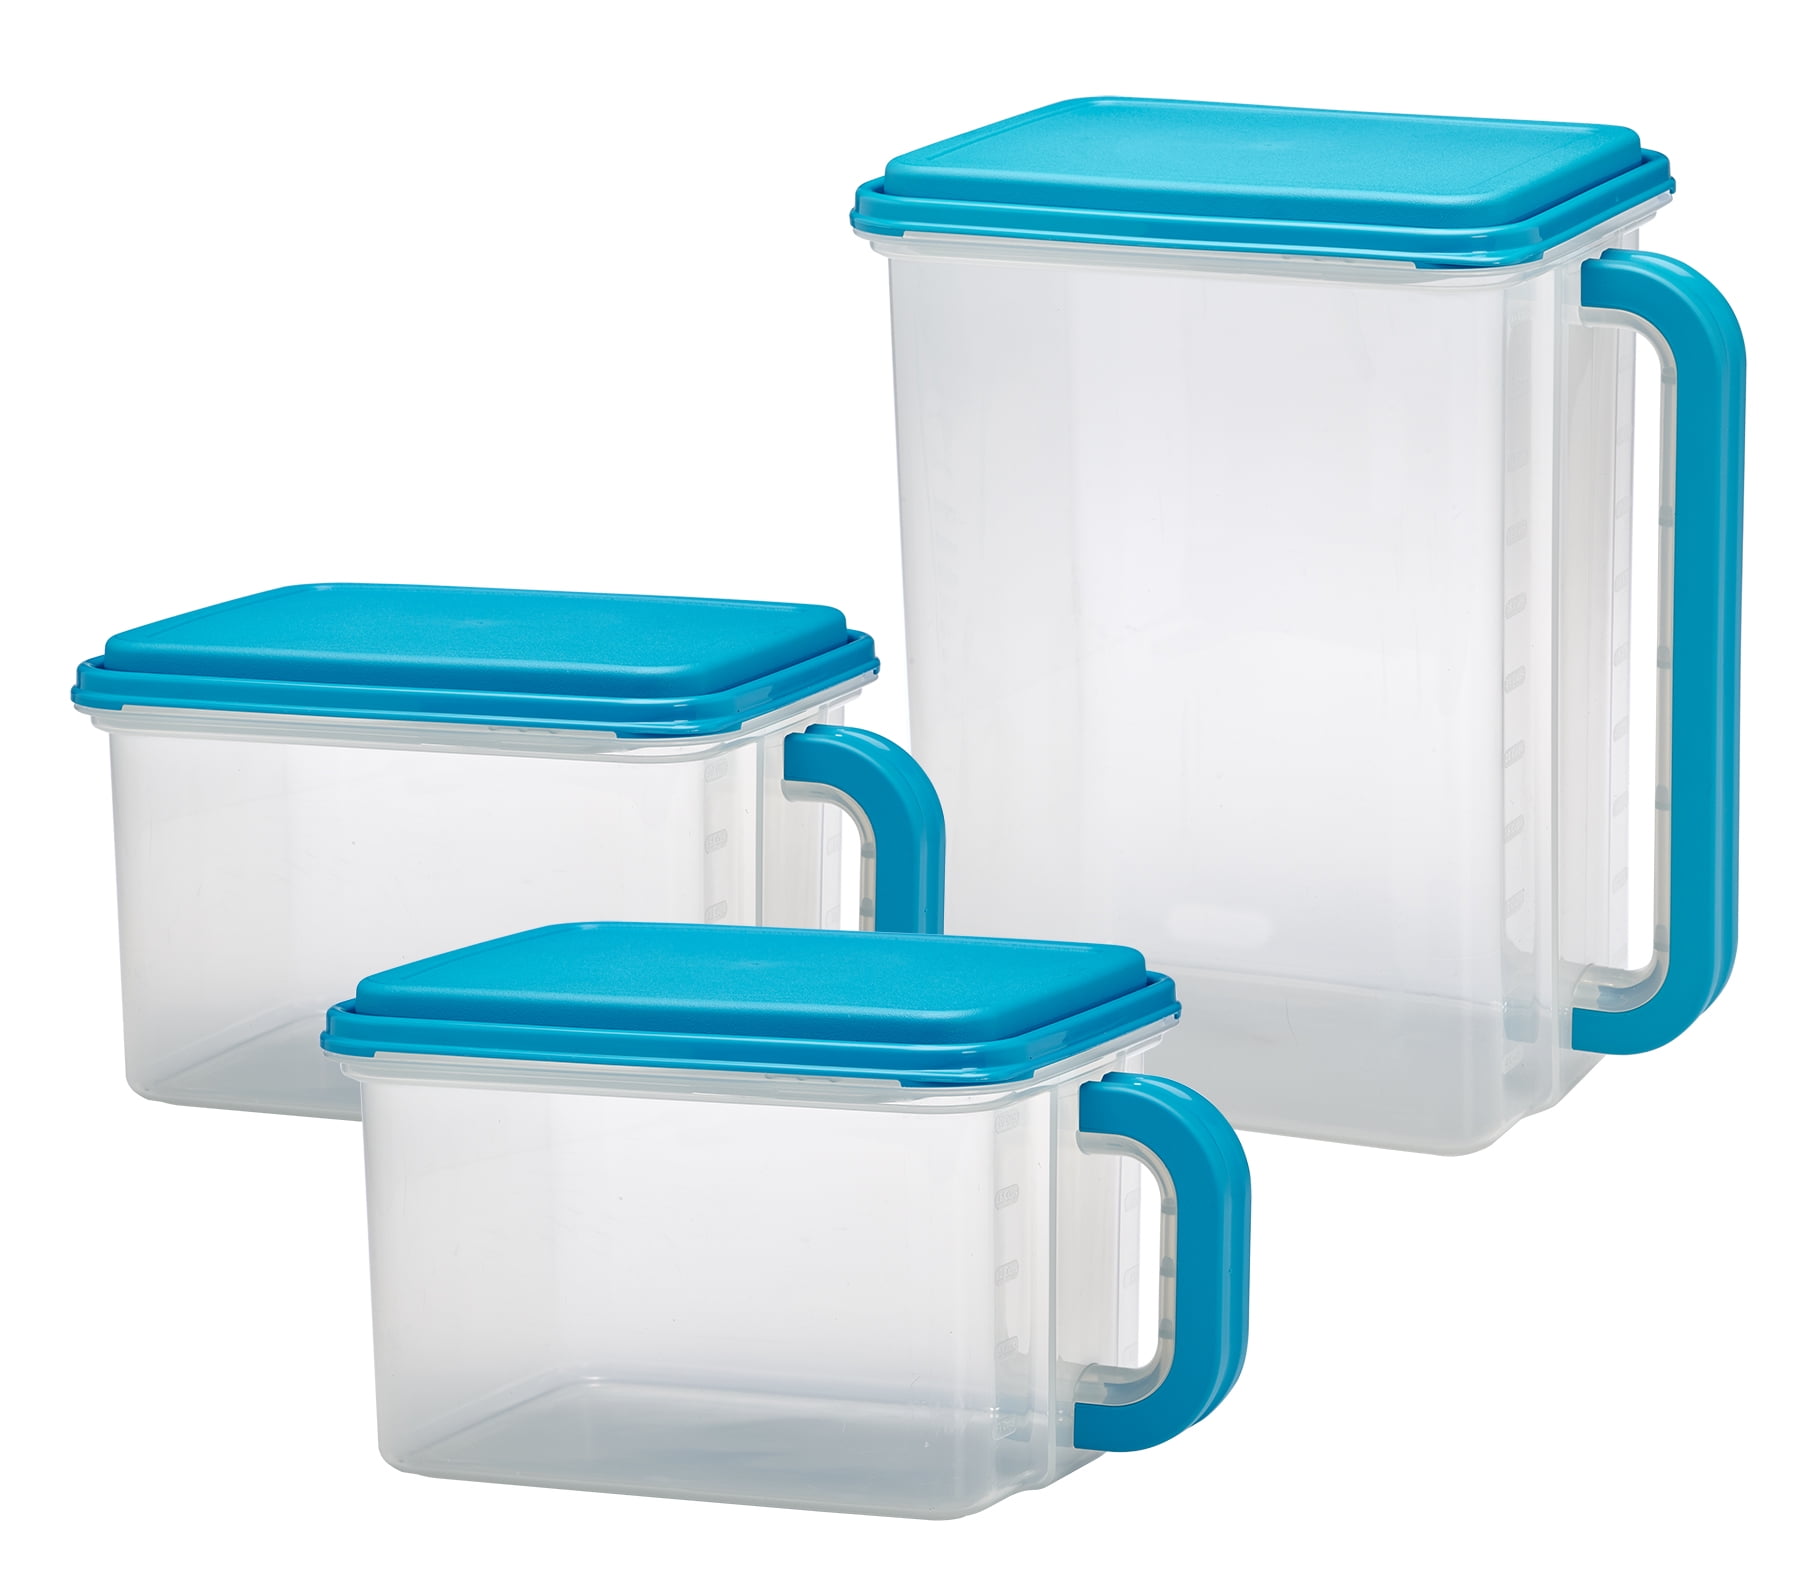 Wholesale protein storage container to Store, Carry and Keep Water